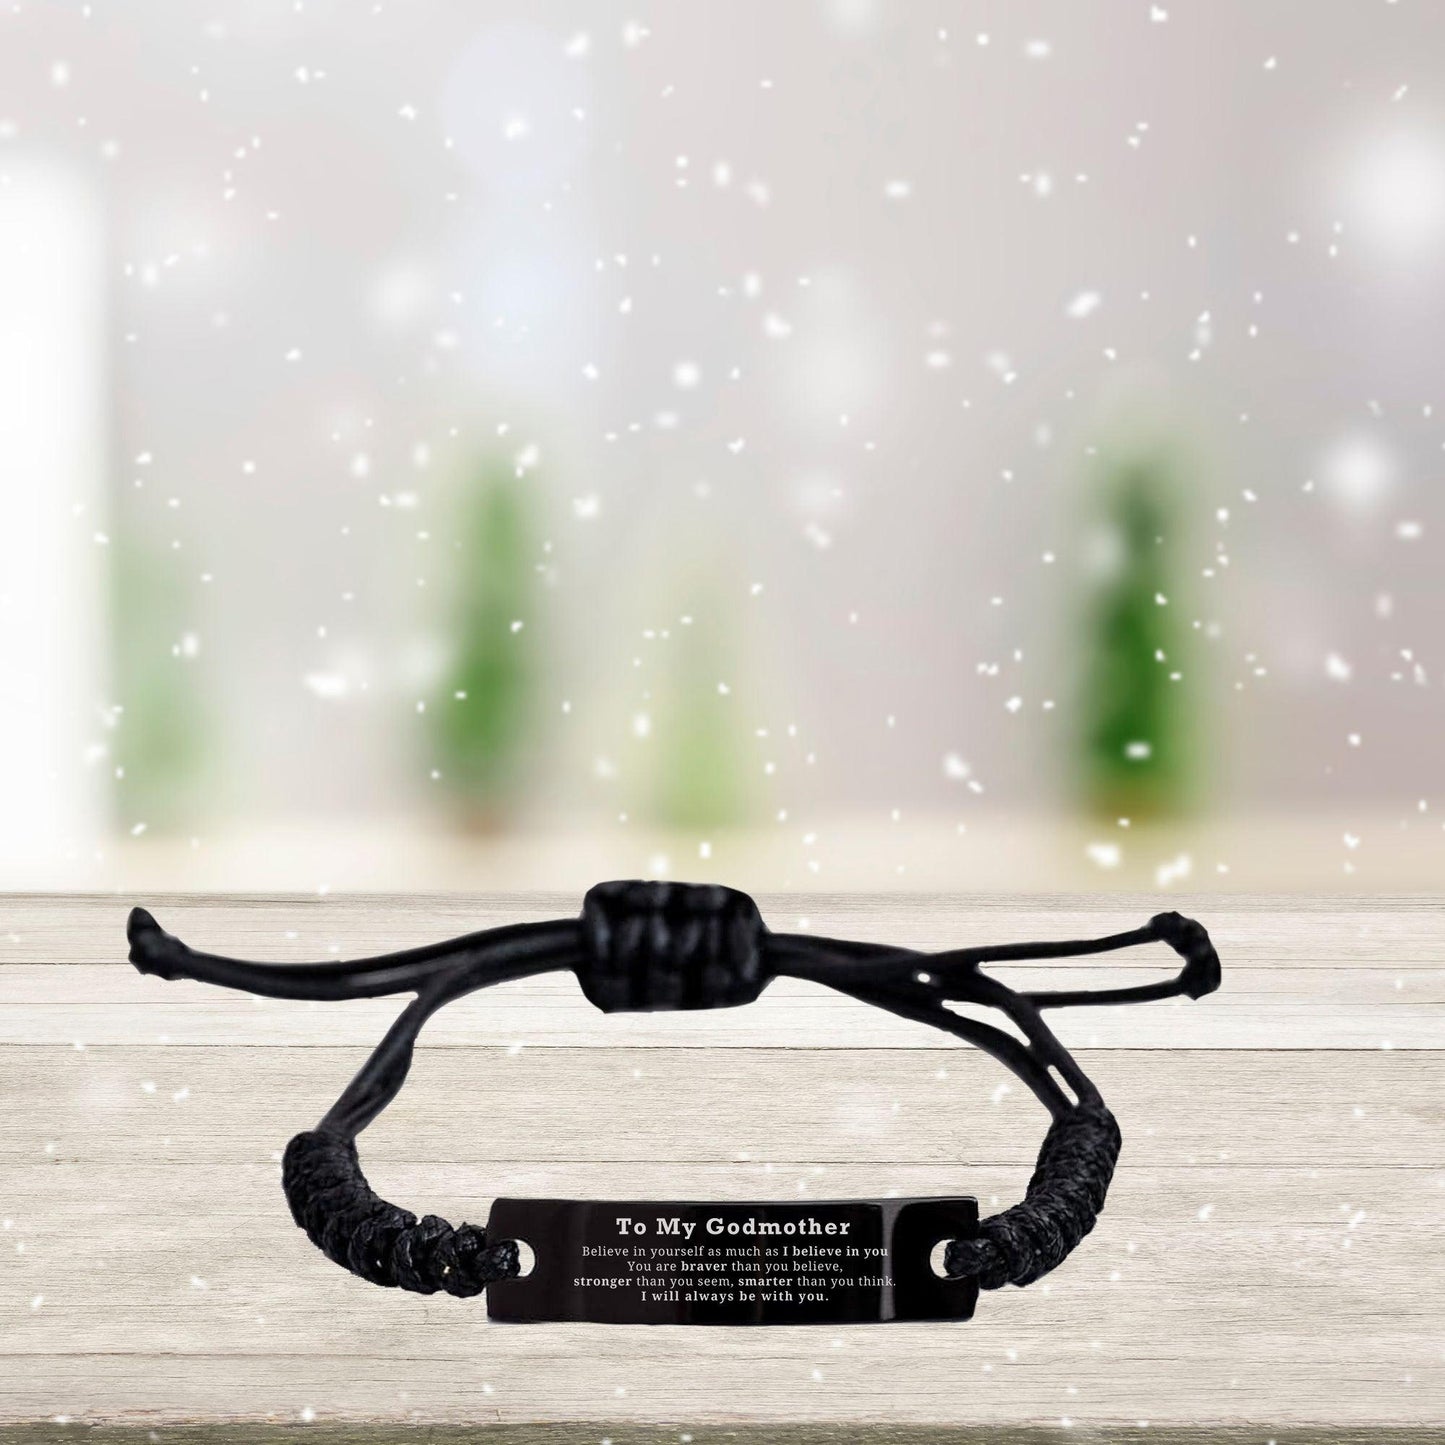 Godmother Black Rope Bracelet - You are braver than you believe, stronger than you seem, Inspirational Birthday Christmas Mother's Day Gifts - Mallard Moon Gift Shop